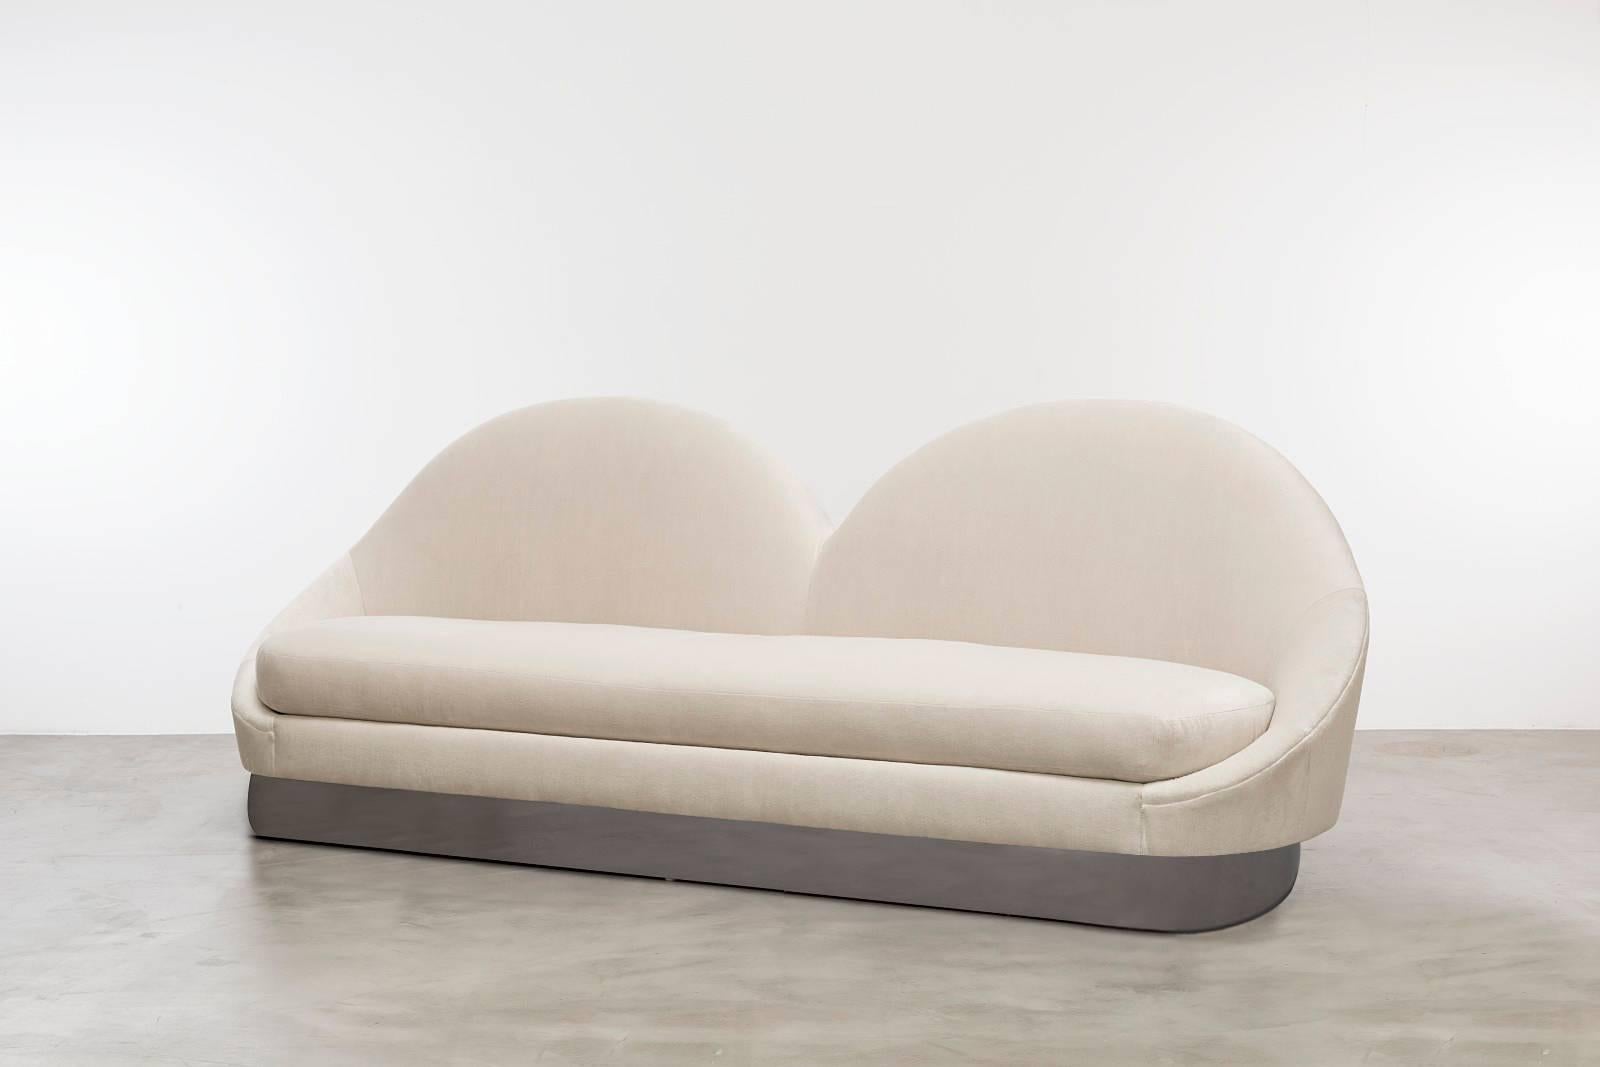 DALI SOFA - Modern Sofa in Cream Velvet

The Dali Sofa is a stunning and unique piece of furniture that draws inspiration from Gaudi architecture. Its symmetrical velvet slopes and racetrack-shaped plinth base create a minimal yet elegant look,